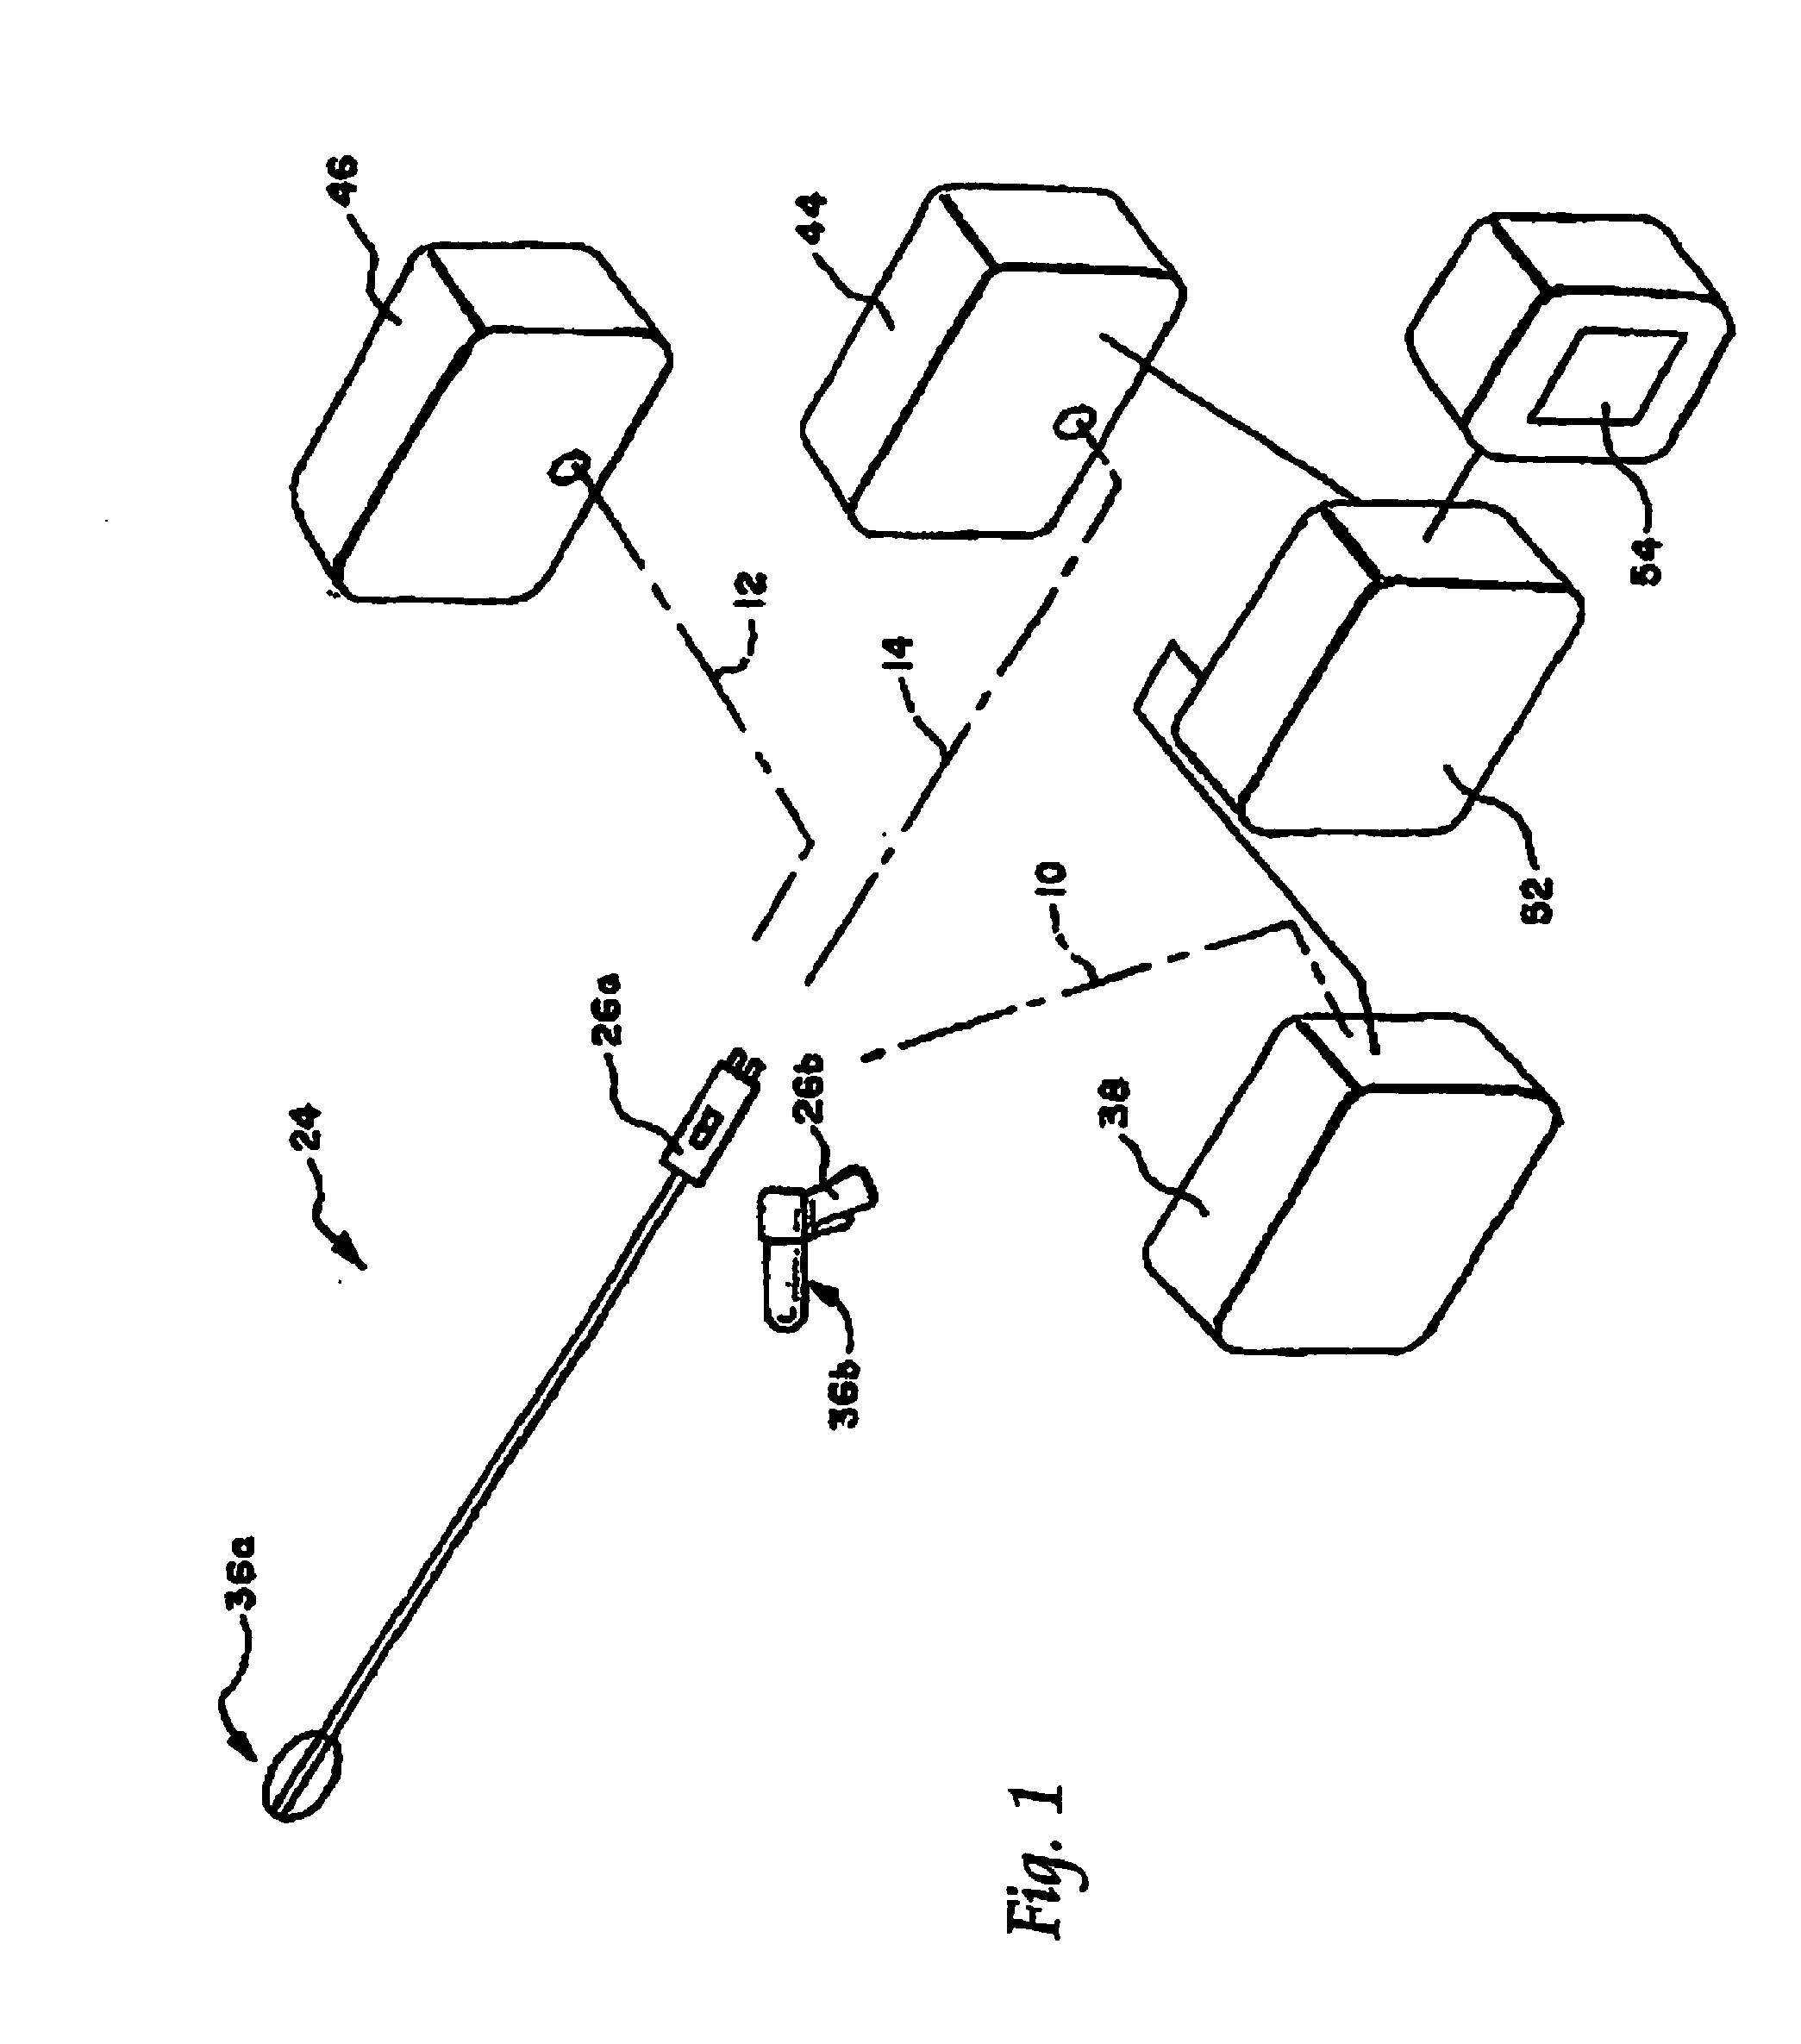 Systems and methods for treating tissue with radiofrequency energy